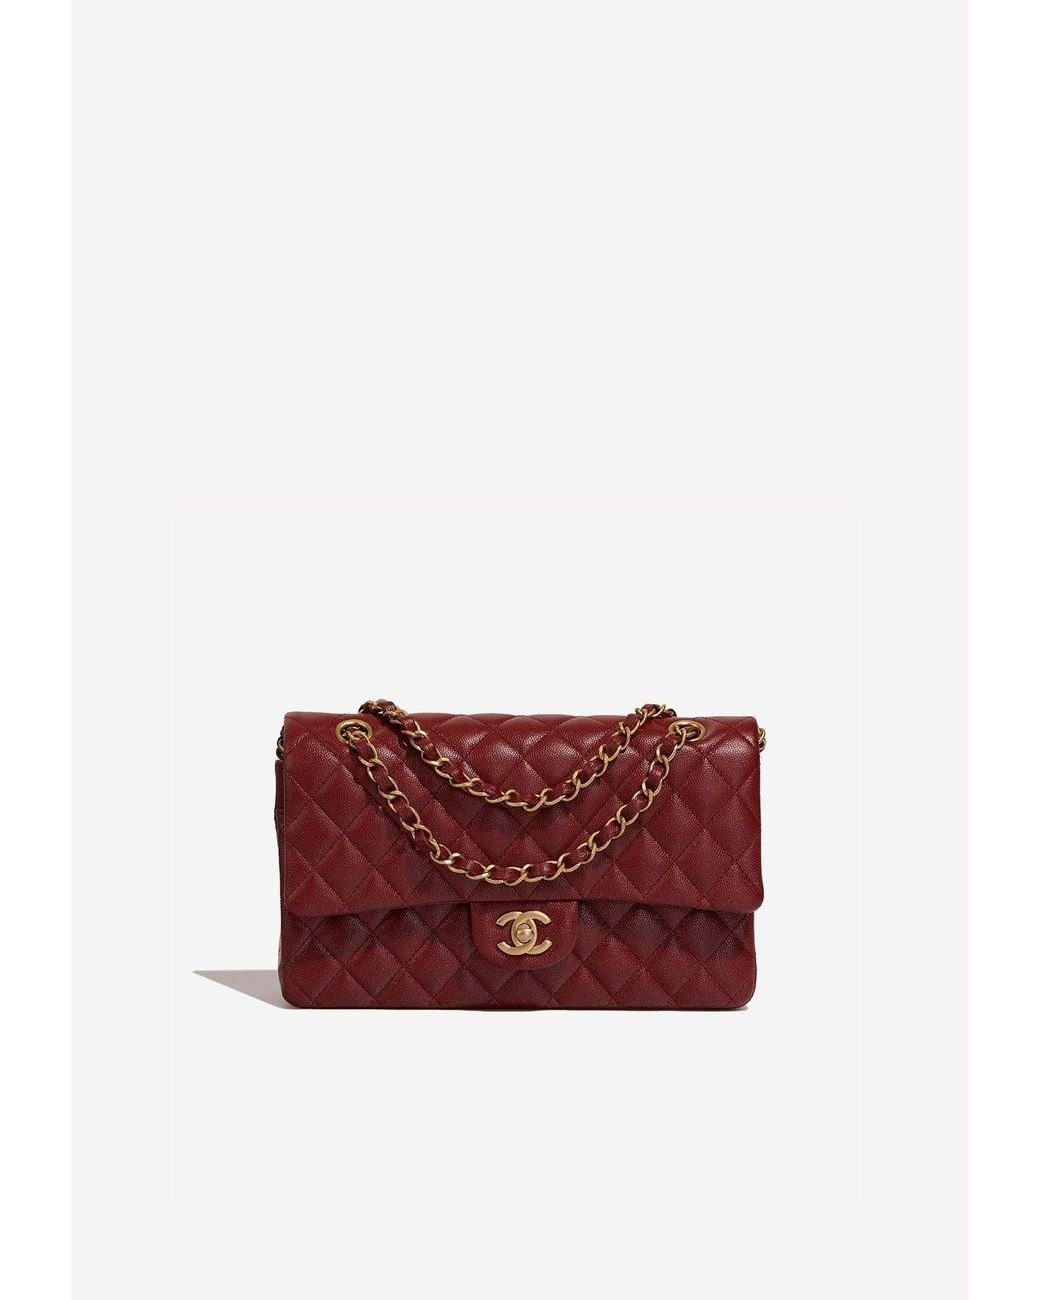 Chanel Classic Flap Vintage with Gold Hardware Red Caviar Leather Cross Body Bag